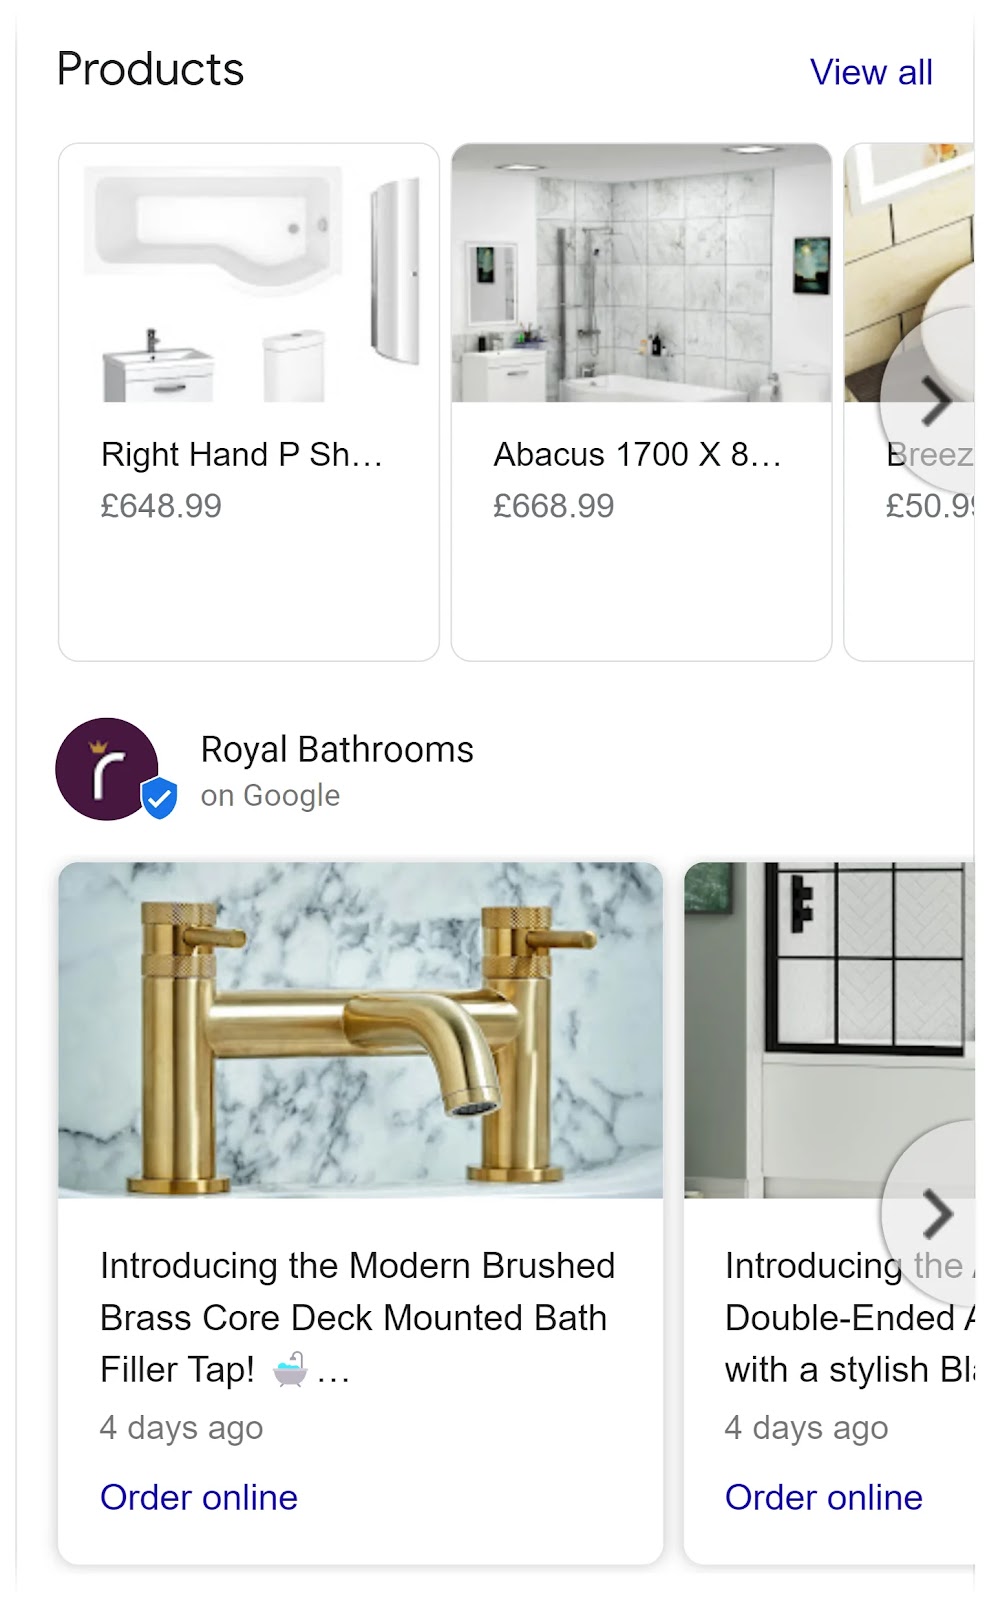 Royal Bathrooms's products and Google Posts